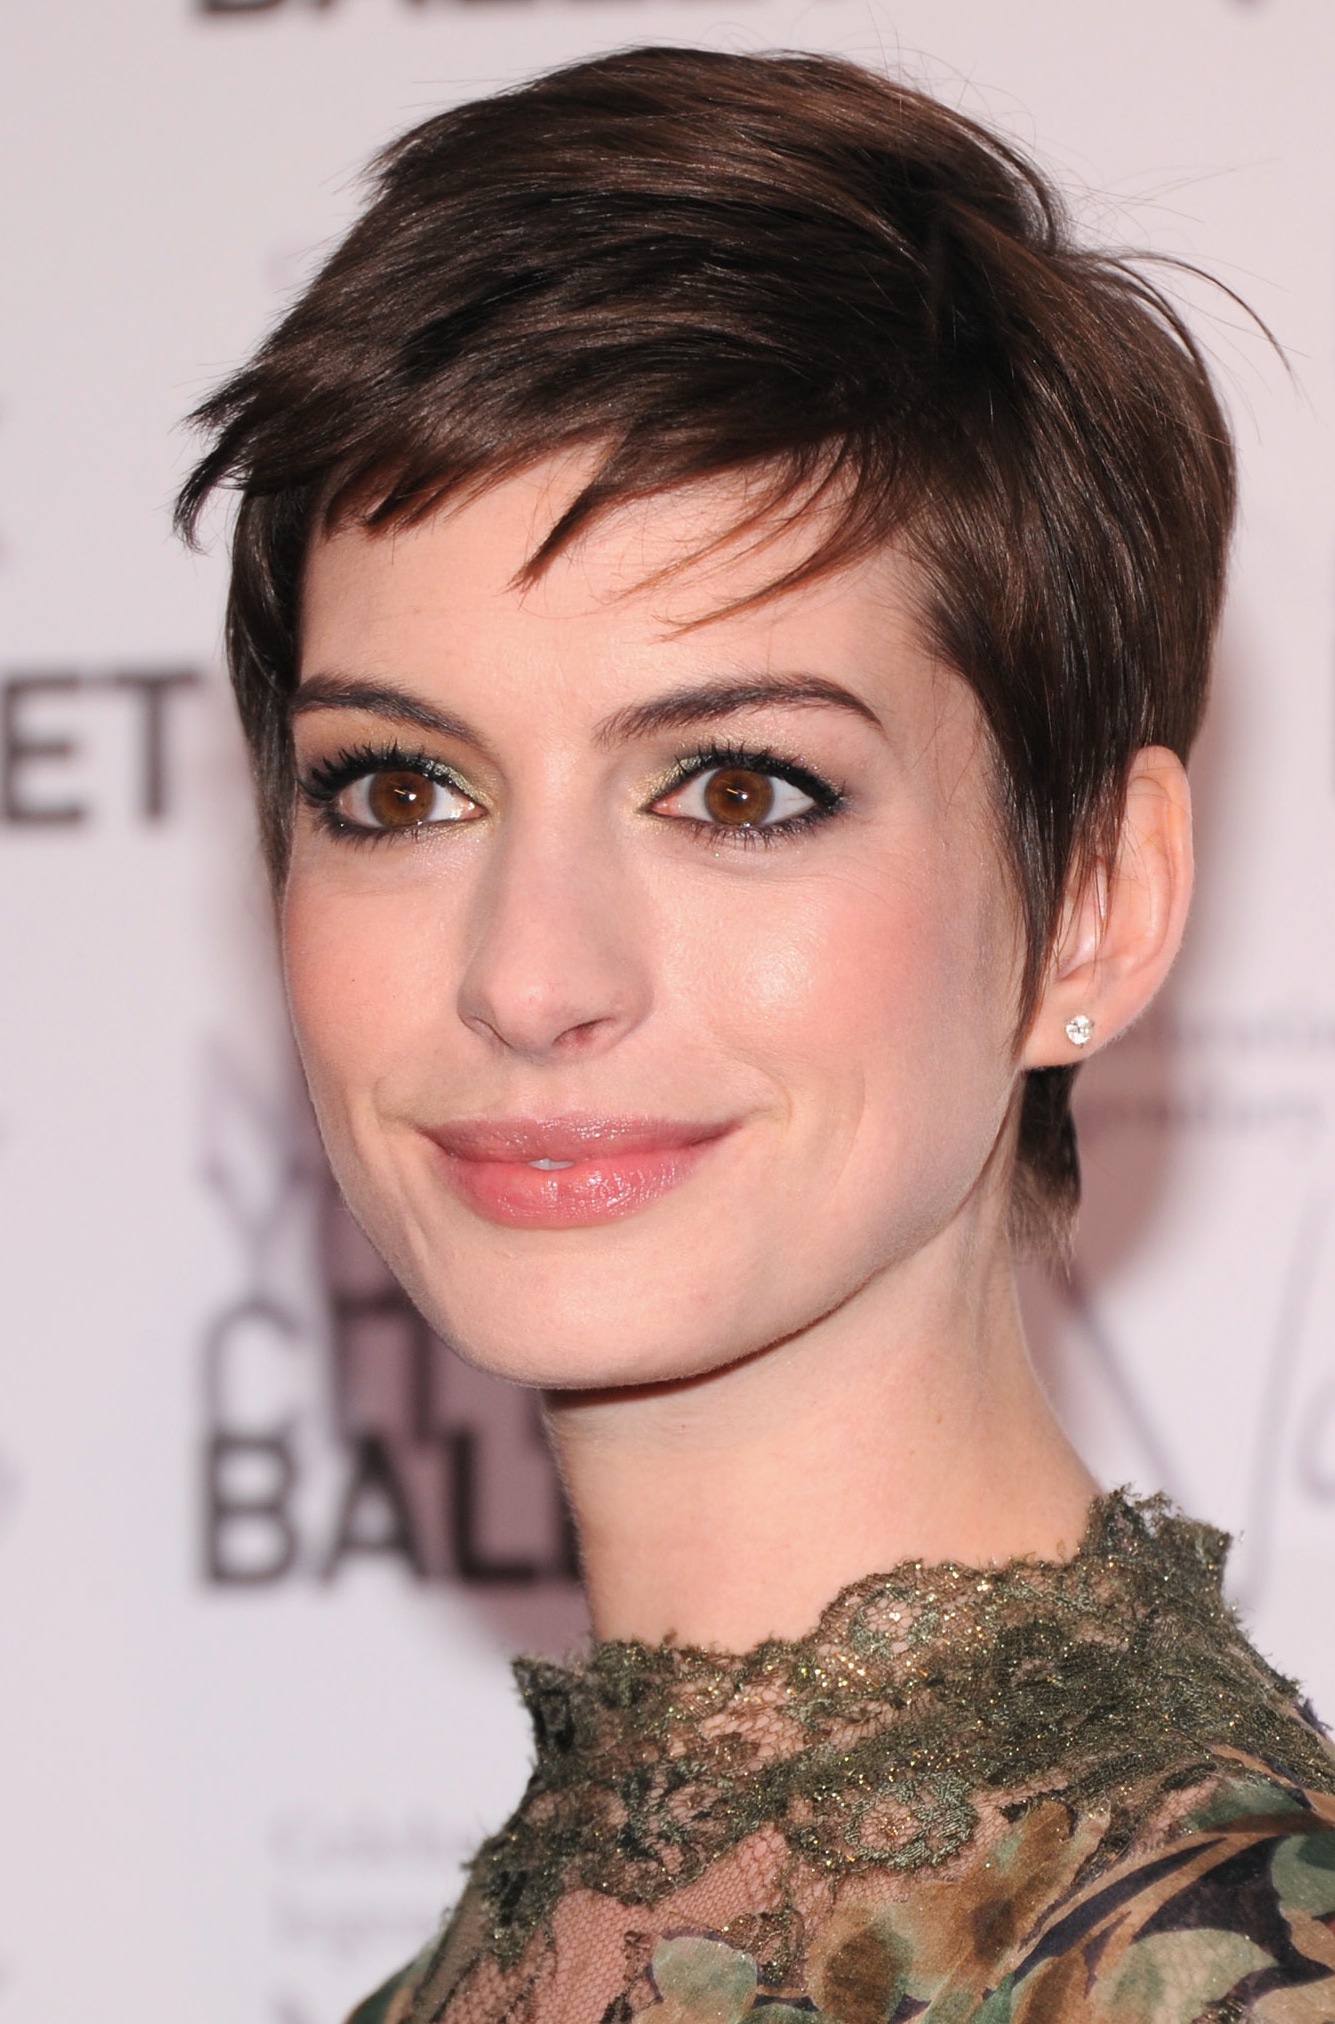 Short hairstyles for women short-hairstyles-for-women-83-11